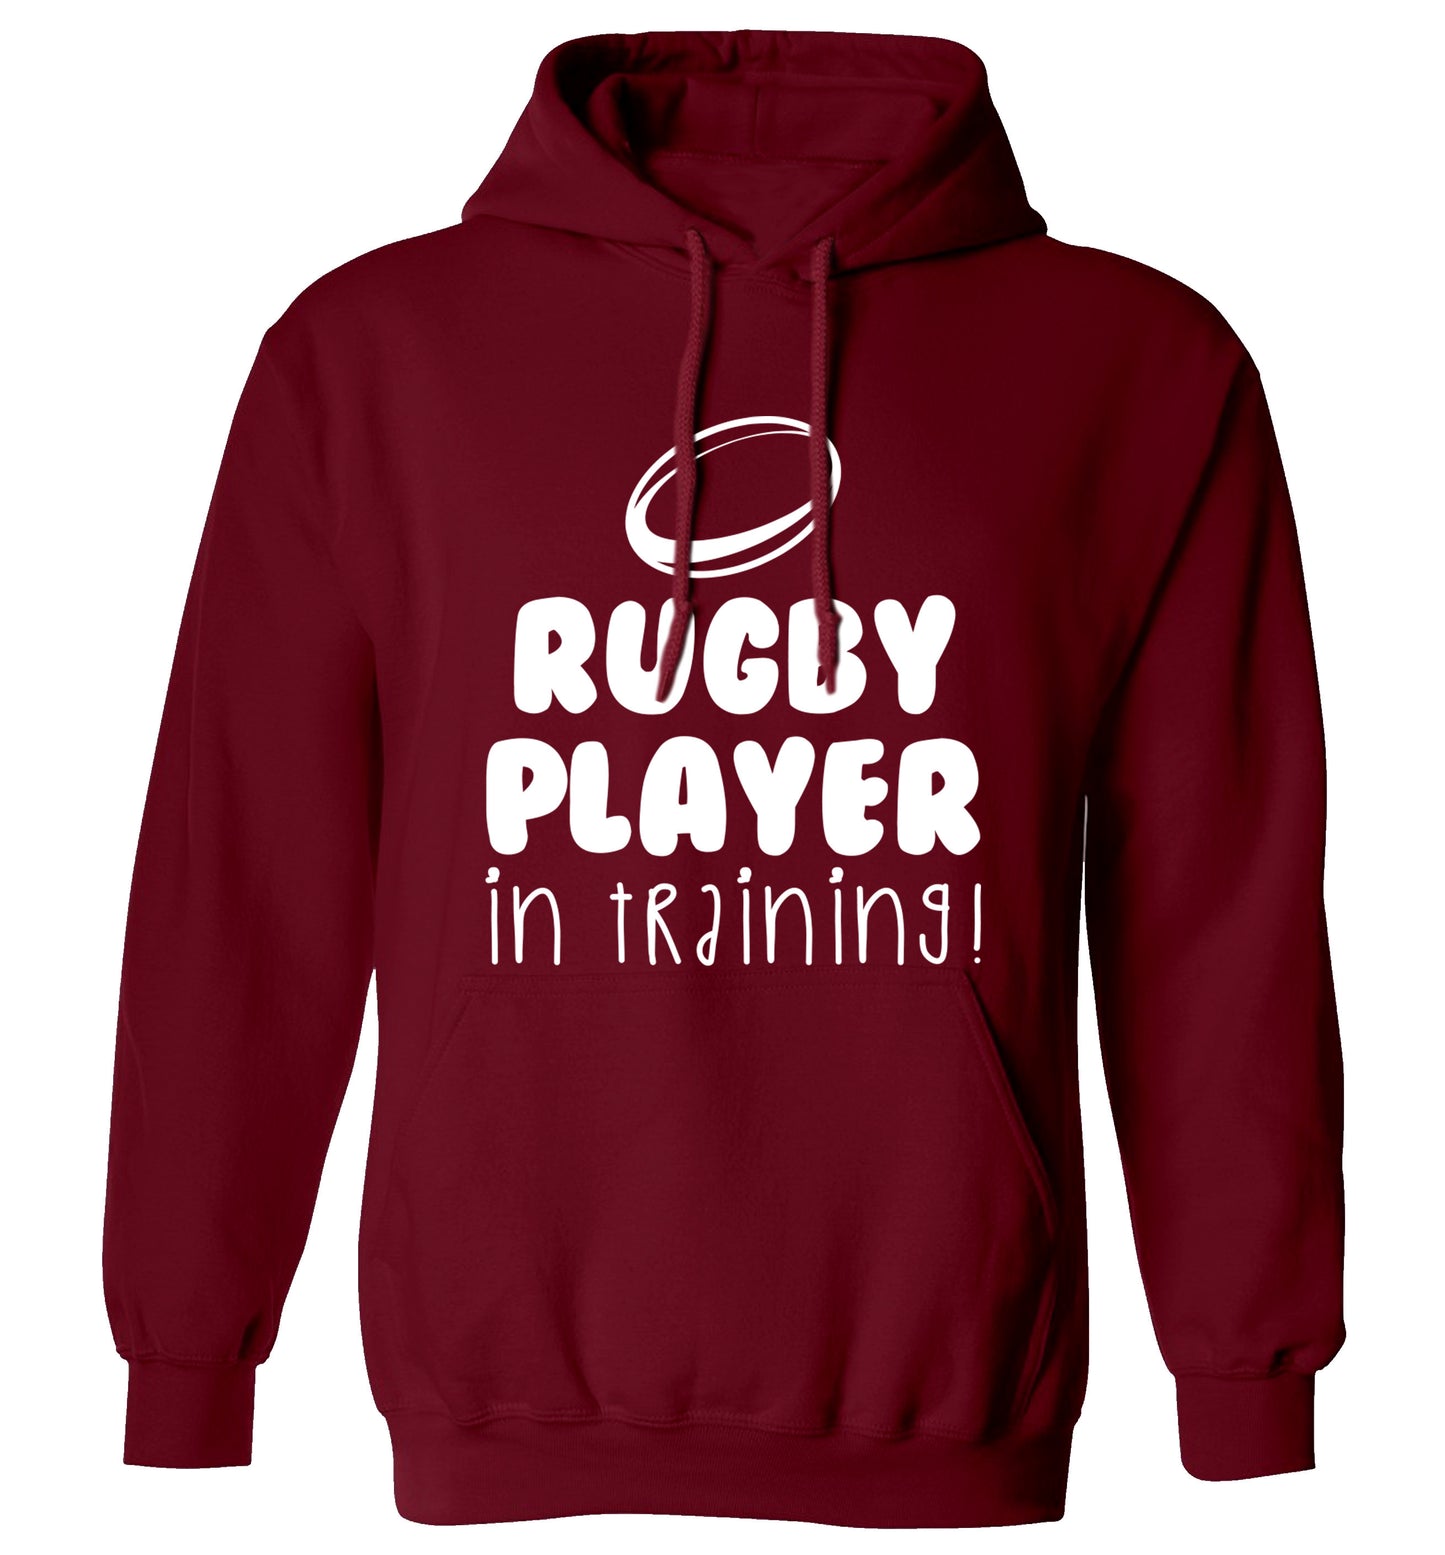 Rugby player in training adults unisex maroon hoodie 2XL